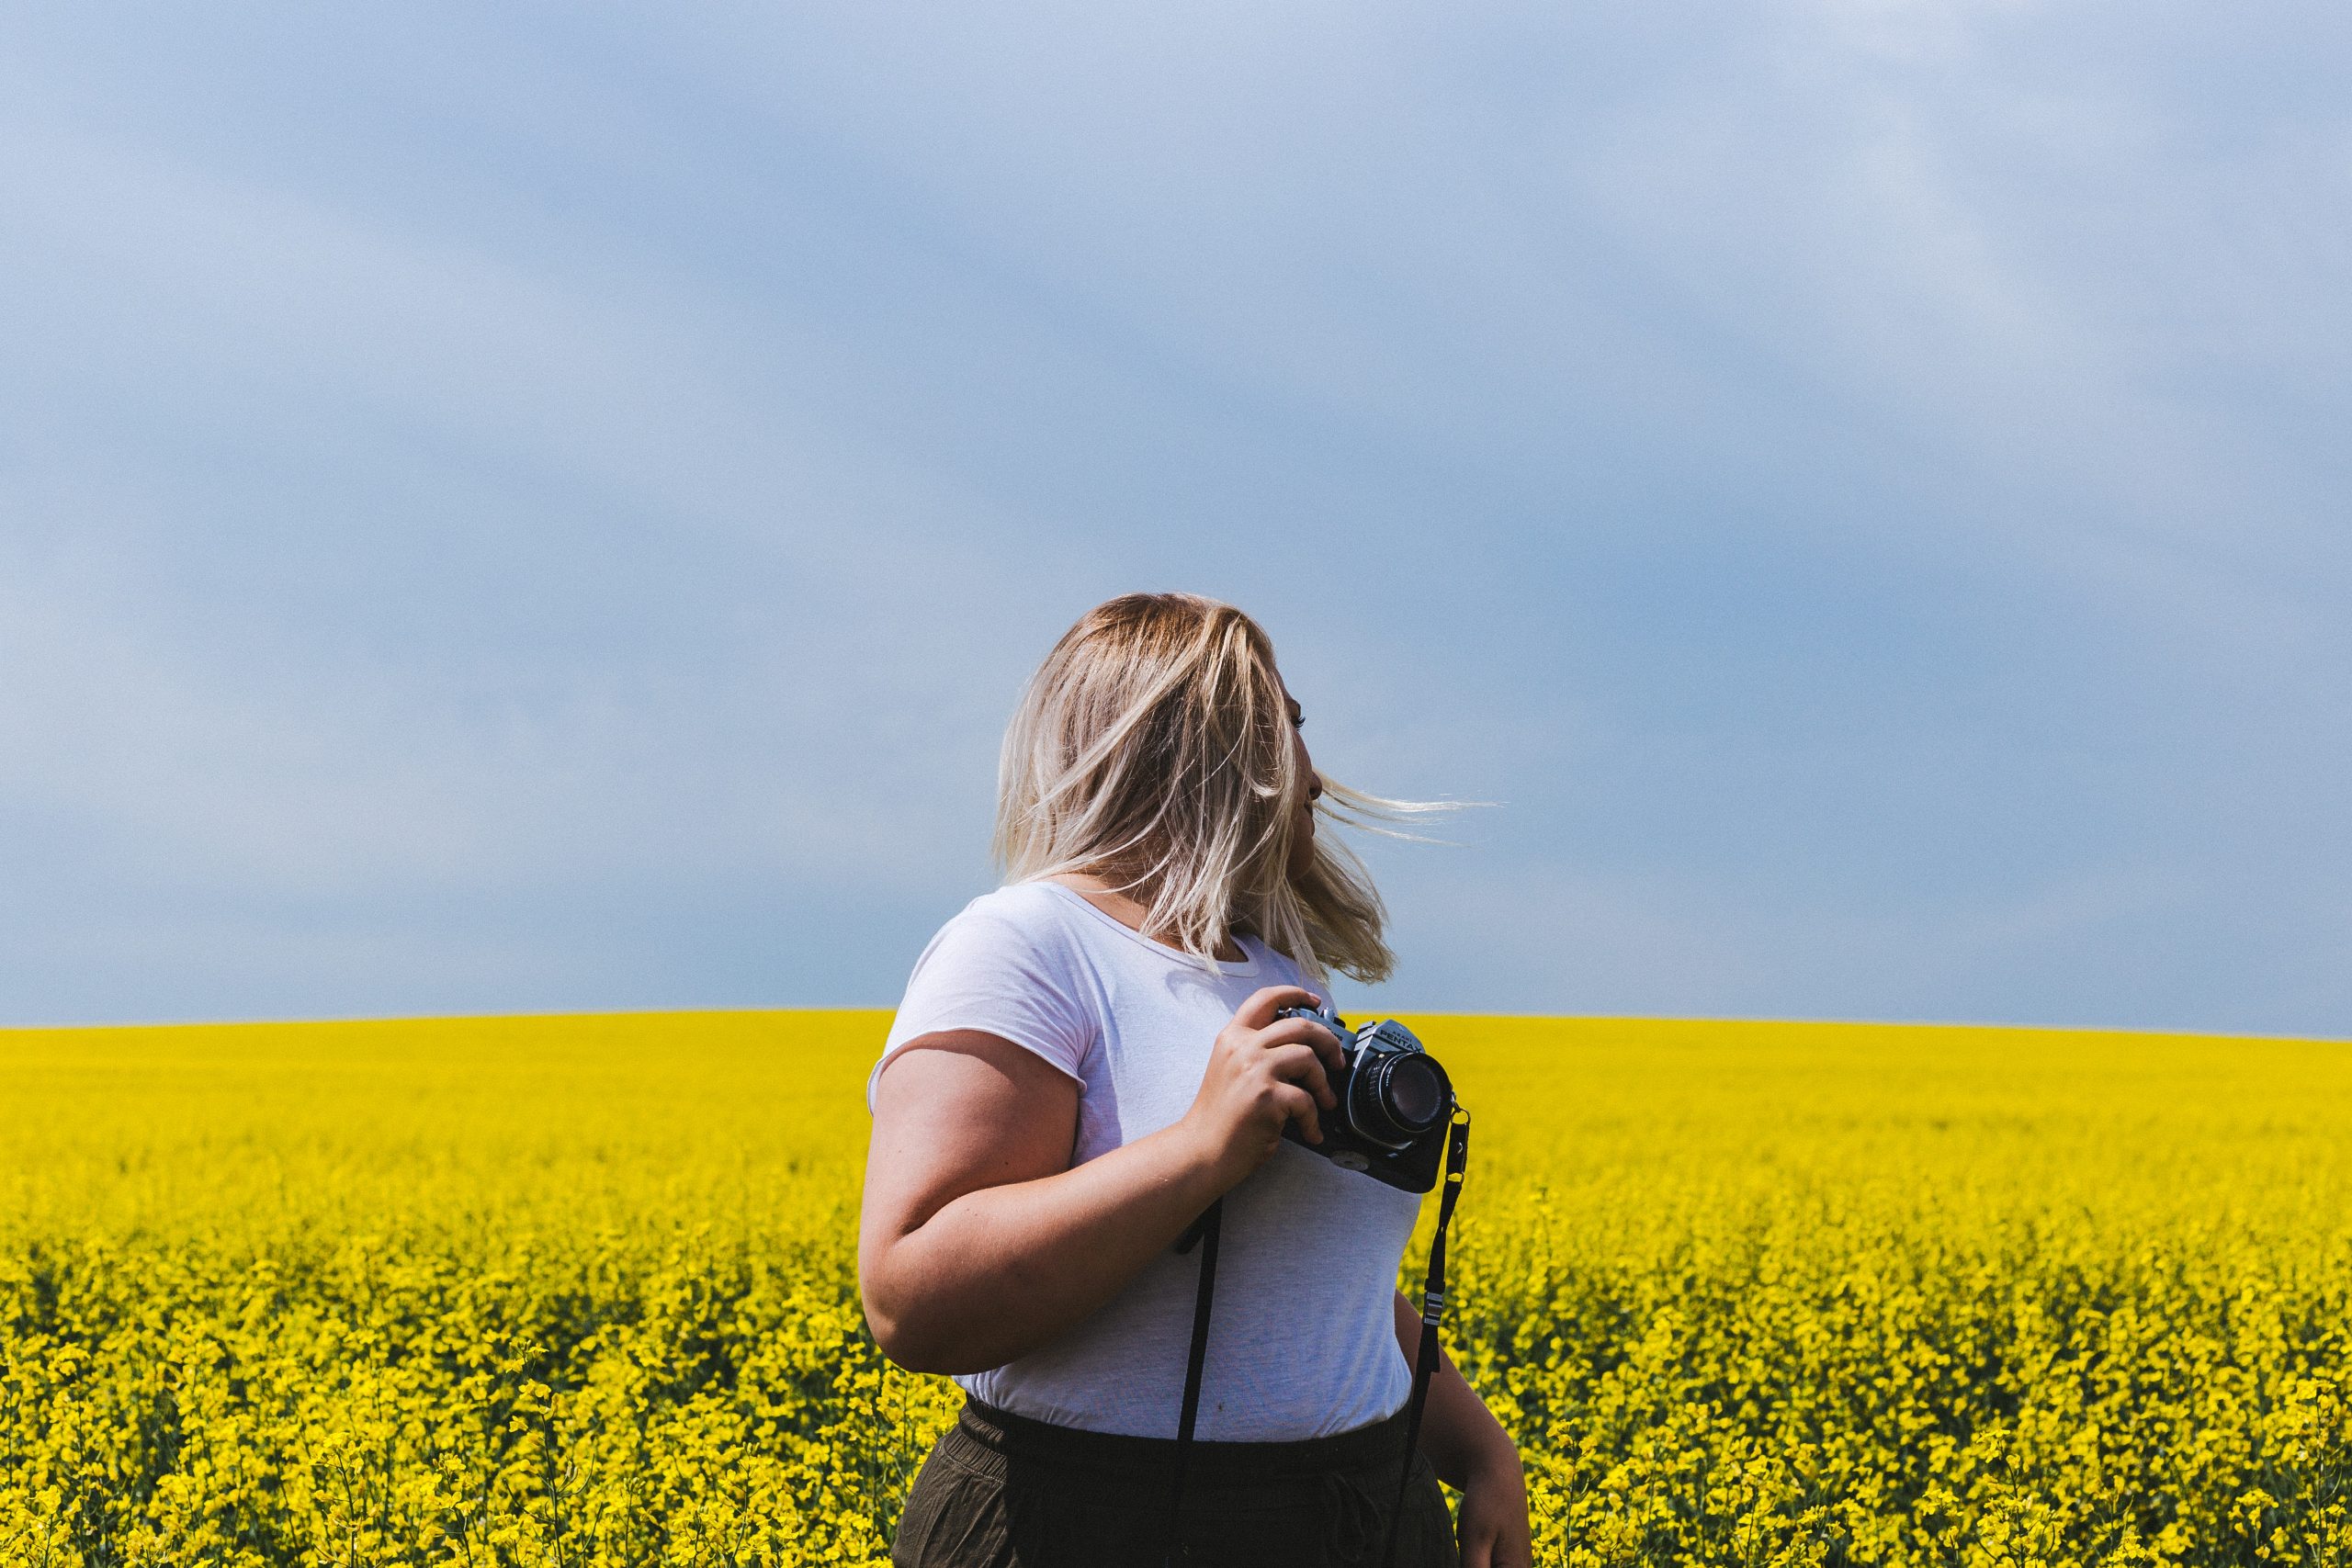 A large looks over her shoulder in the canola field and holds a camera.